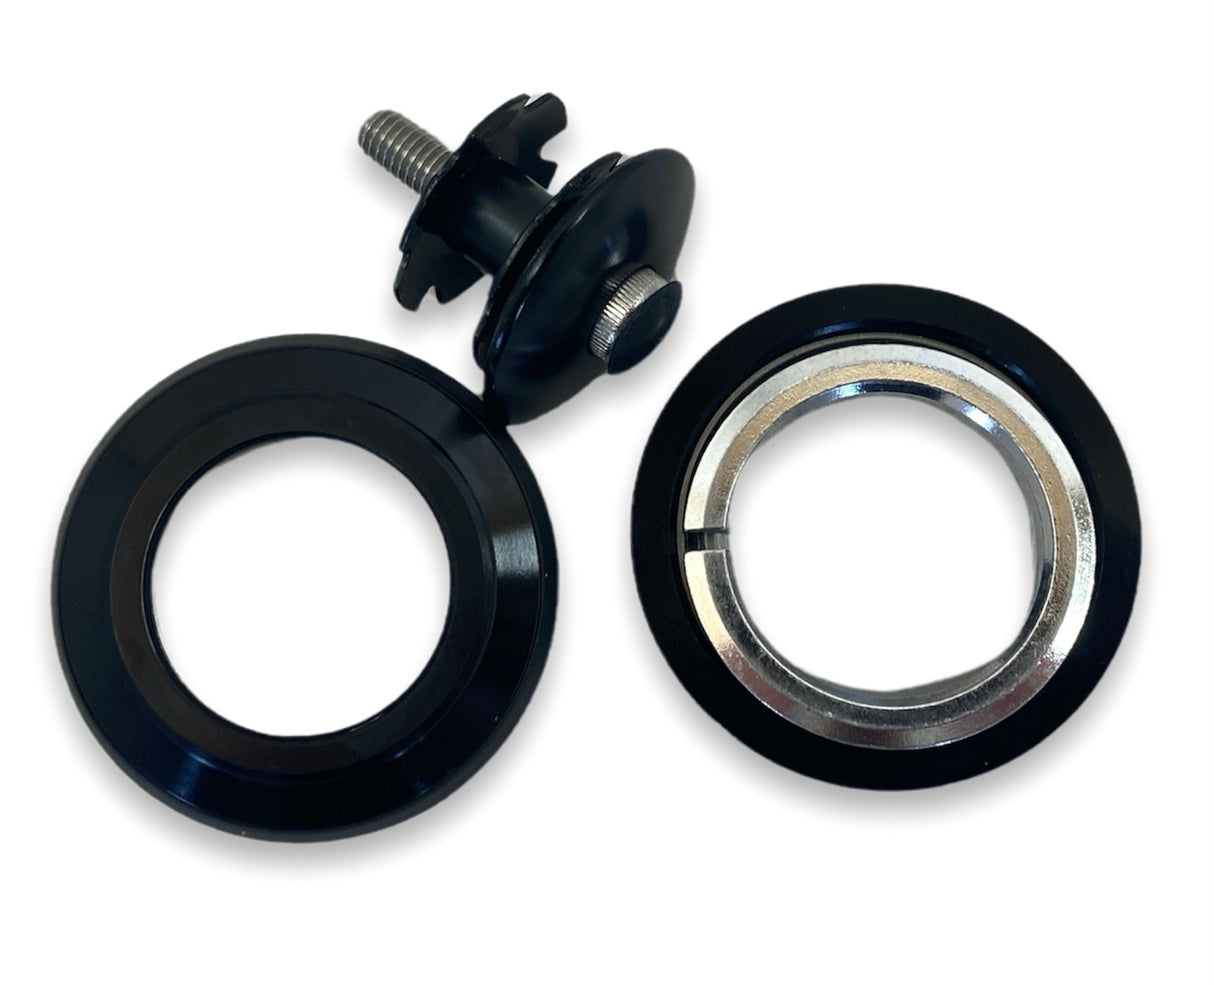 Integrated headset for LMX 161